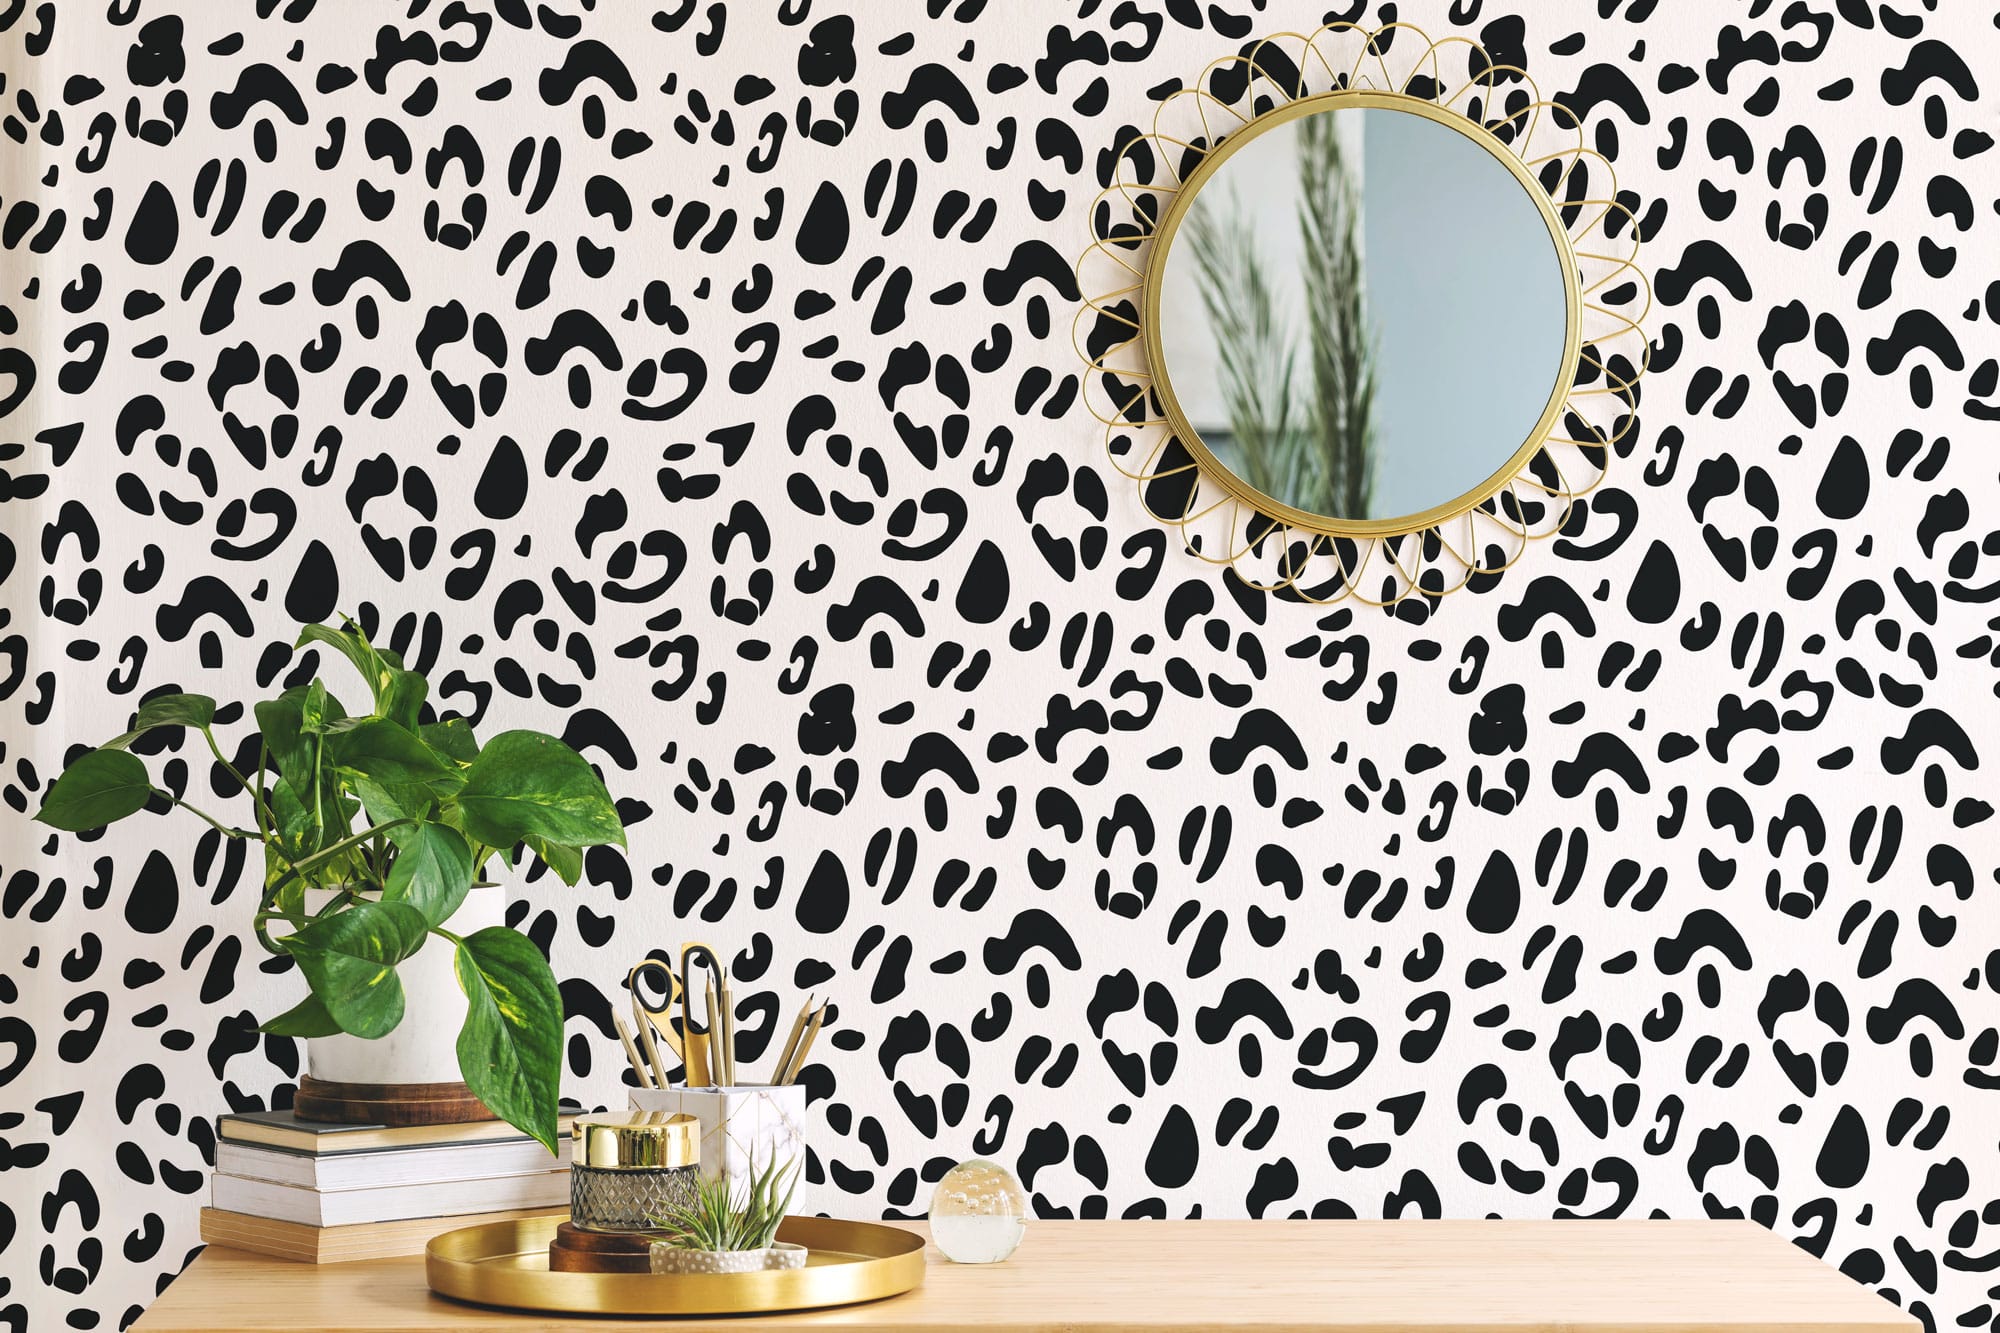 Black and white leopard print wallpaper - Peel and Stick or Non-Pasted